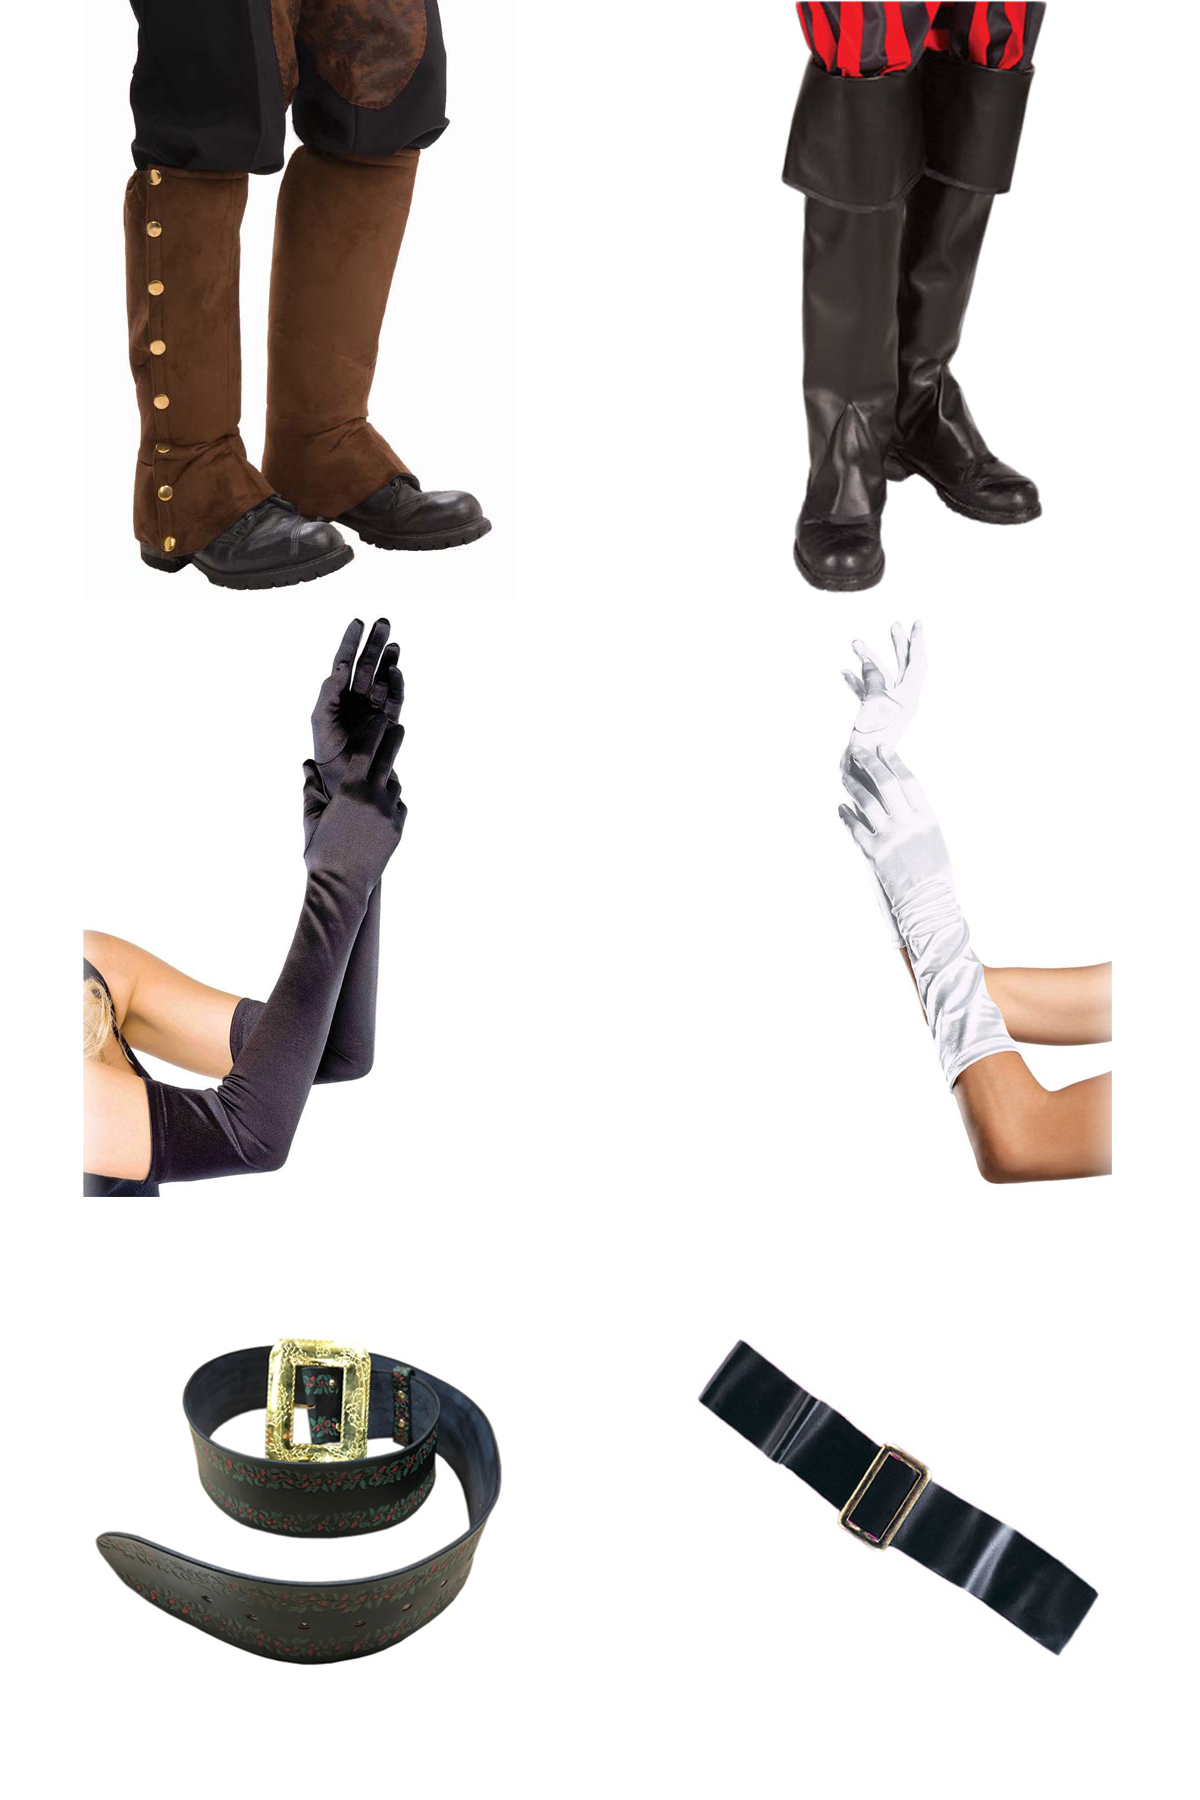 costume-accessories-belts-boot-tops-gloves-main-link